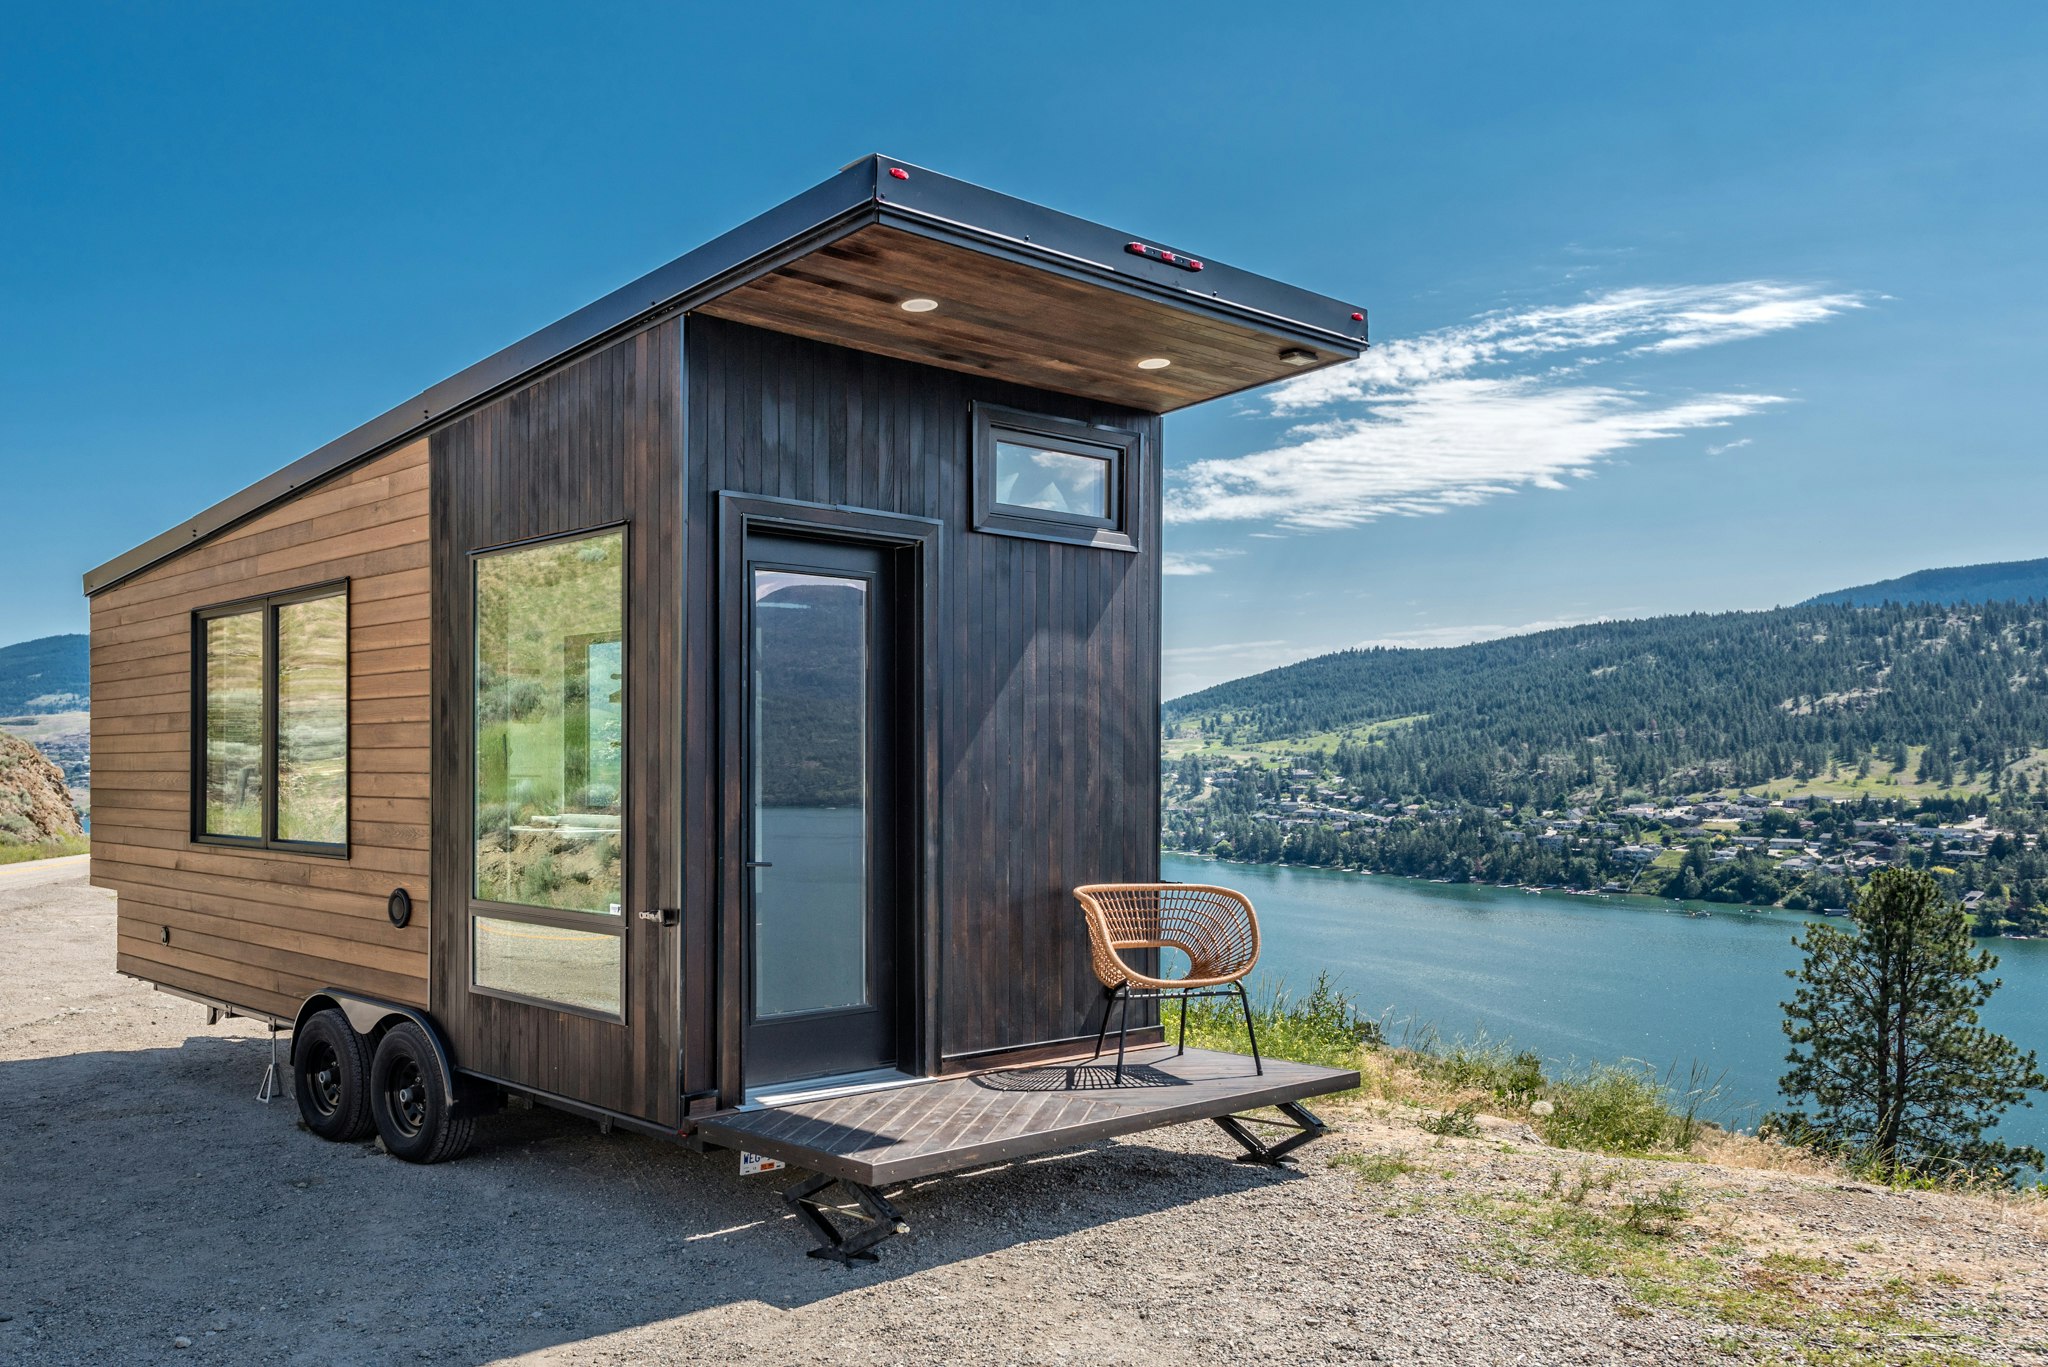 This tiny solar-powered home is for sale on , starting at just $10K